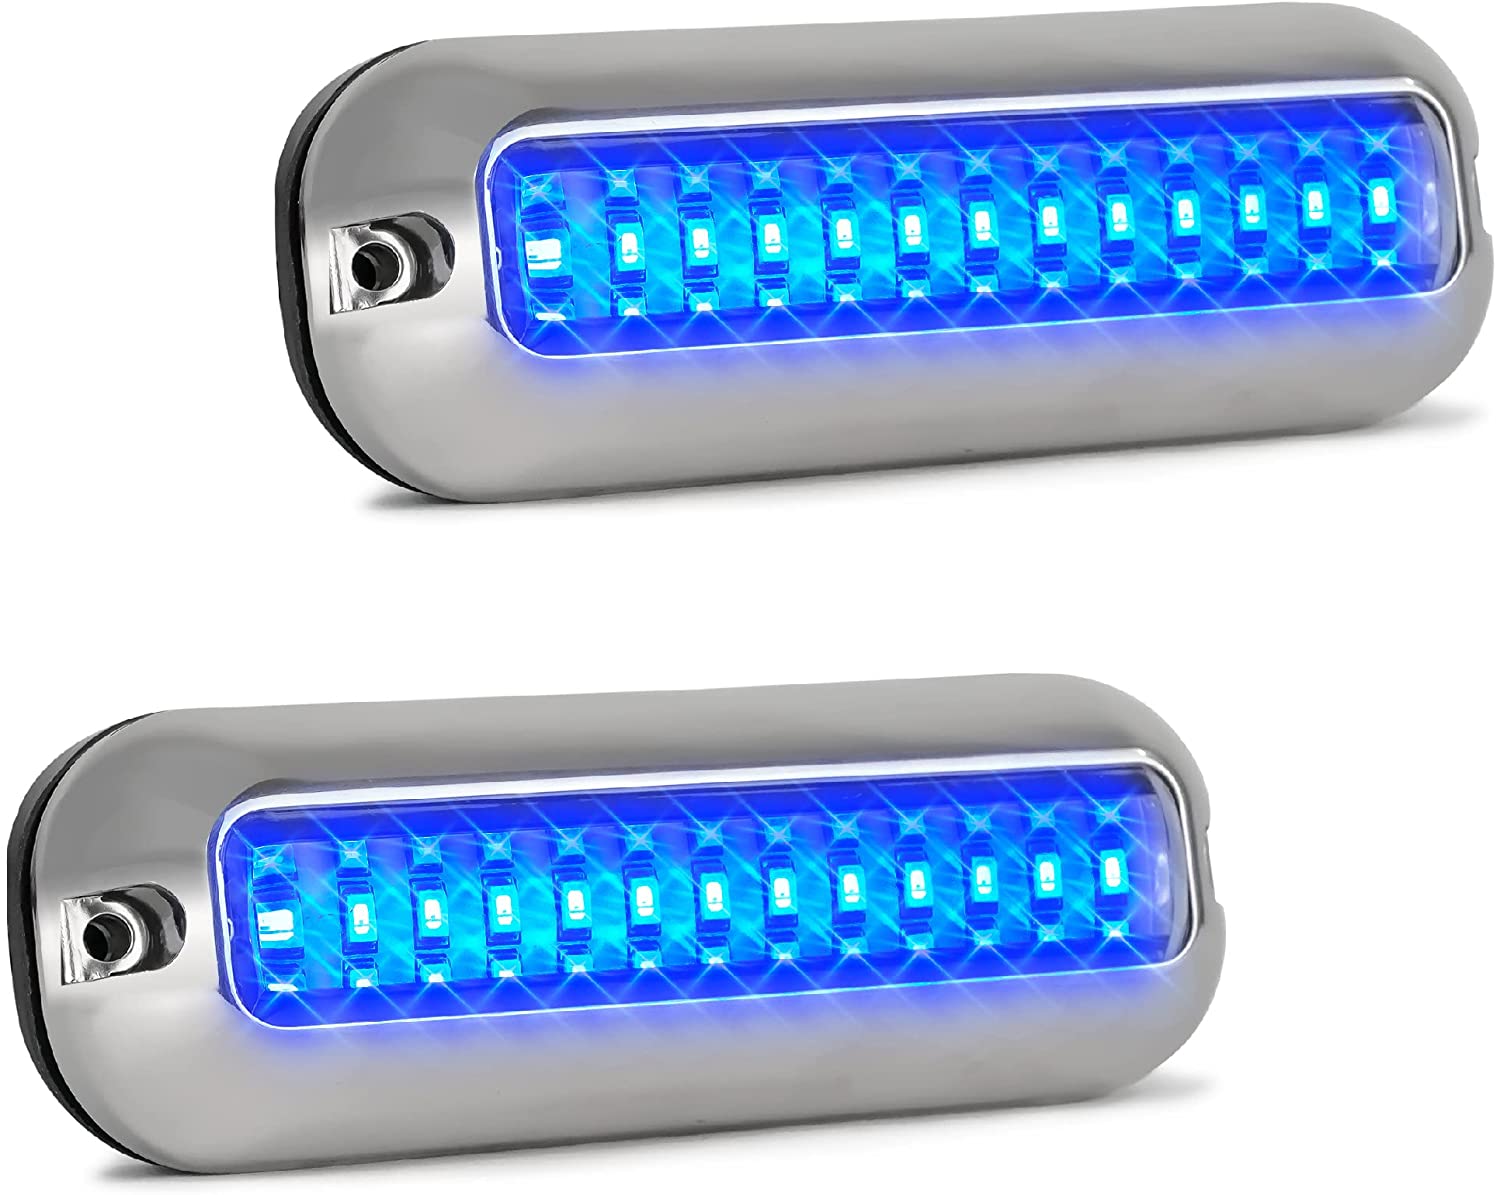 Blue Marine LED Boat Underwater Pontoon Transom Light | Polished 316 Stainless Steel Housing | Waterproof IP68 Surface Mount, 2-Pack-Canadian Marine &amp; Outdoor Equipment